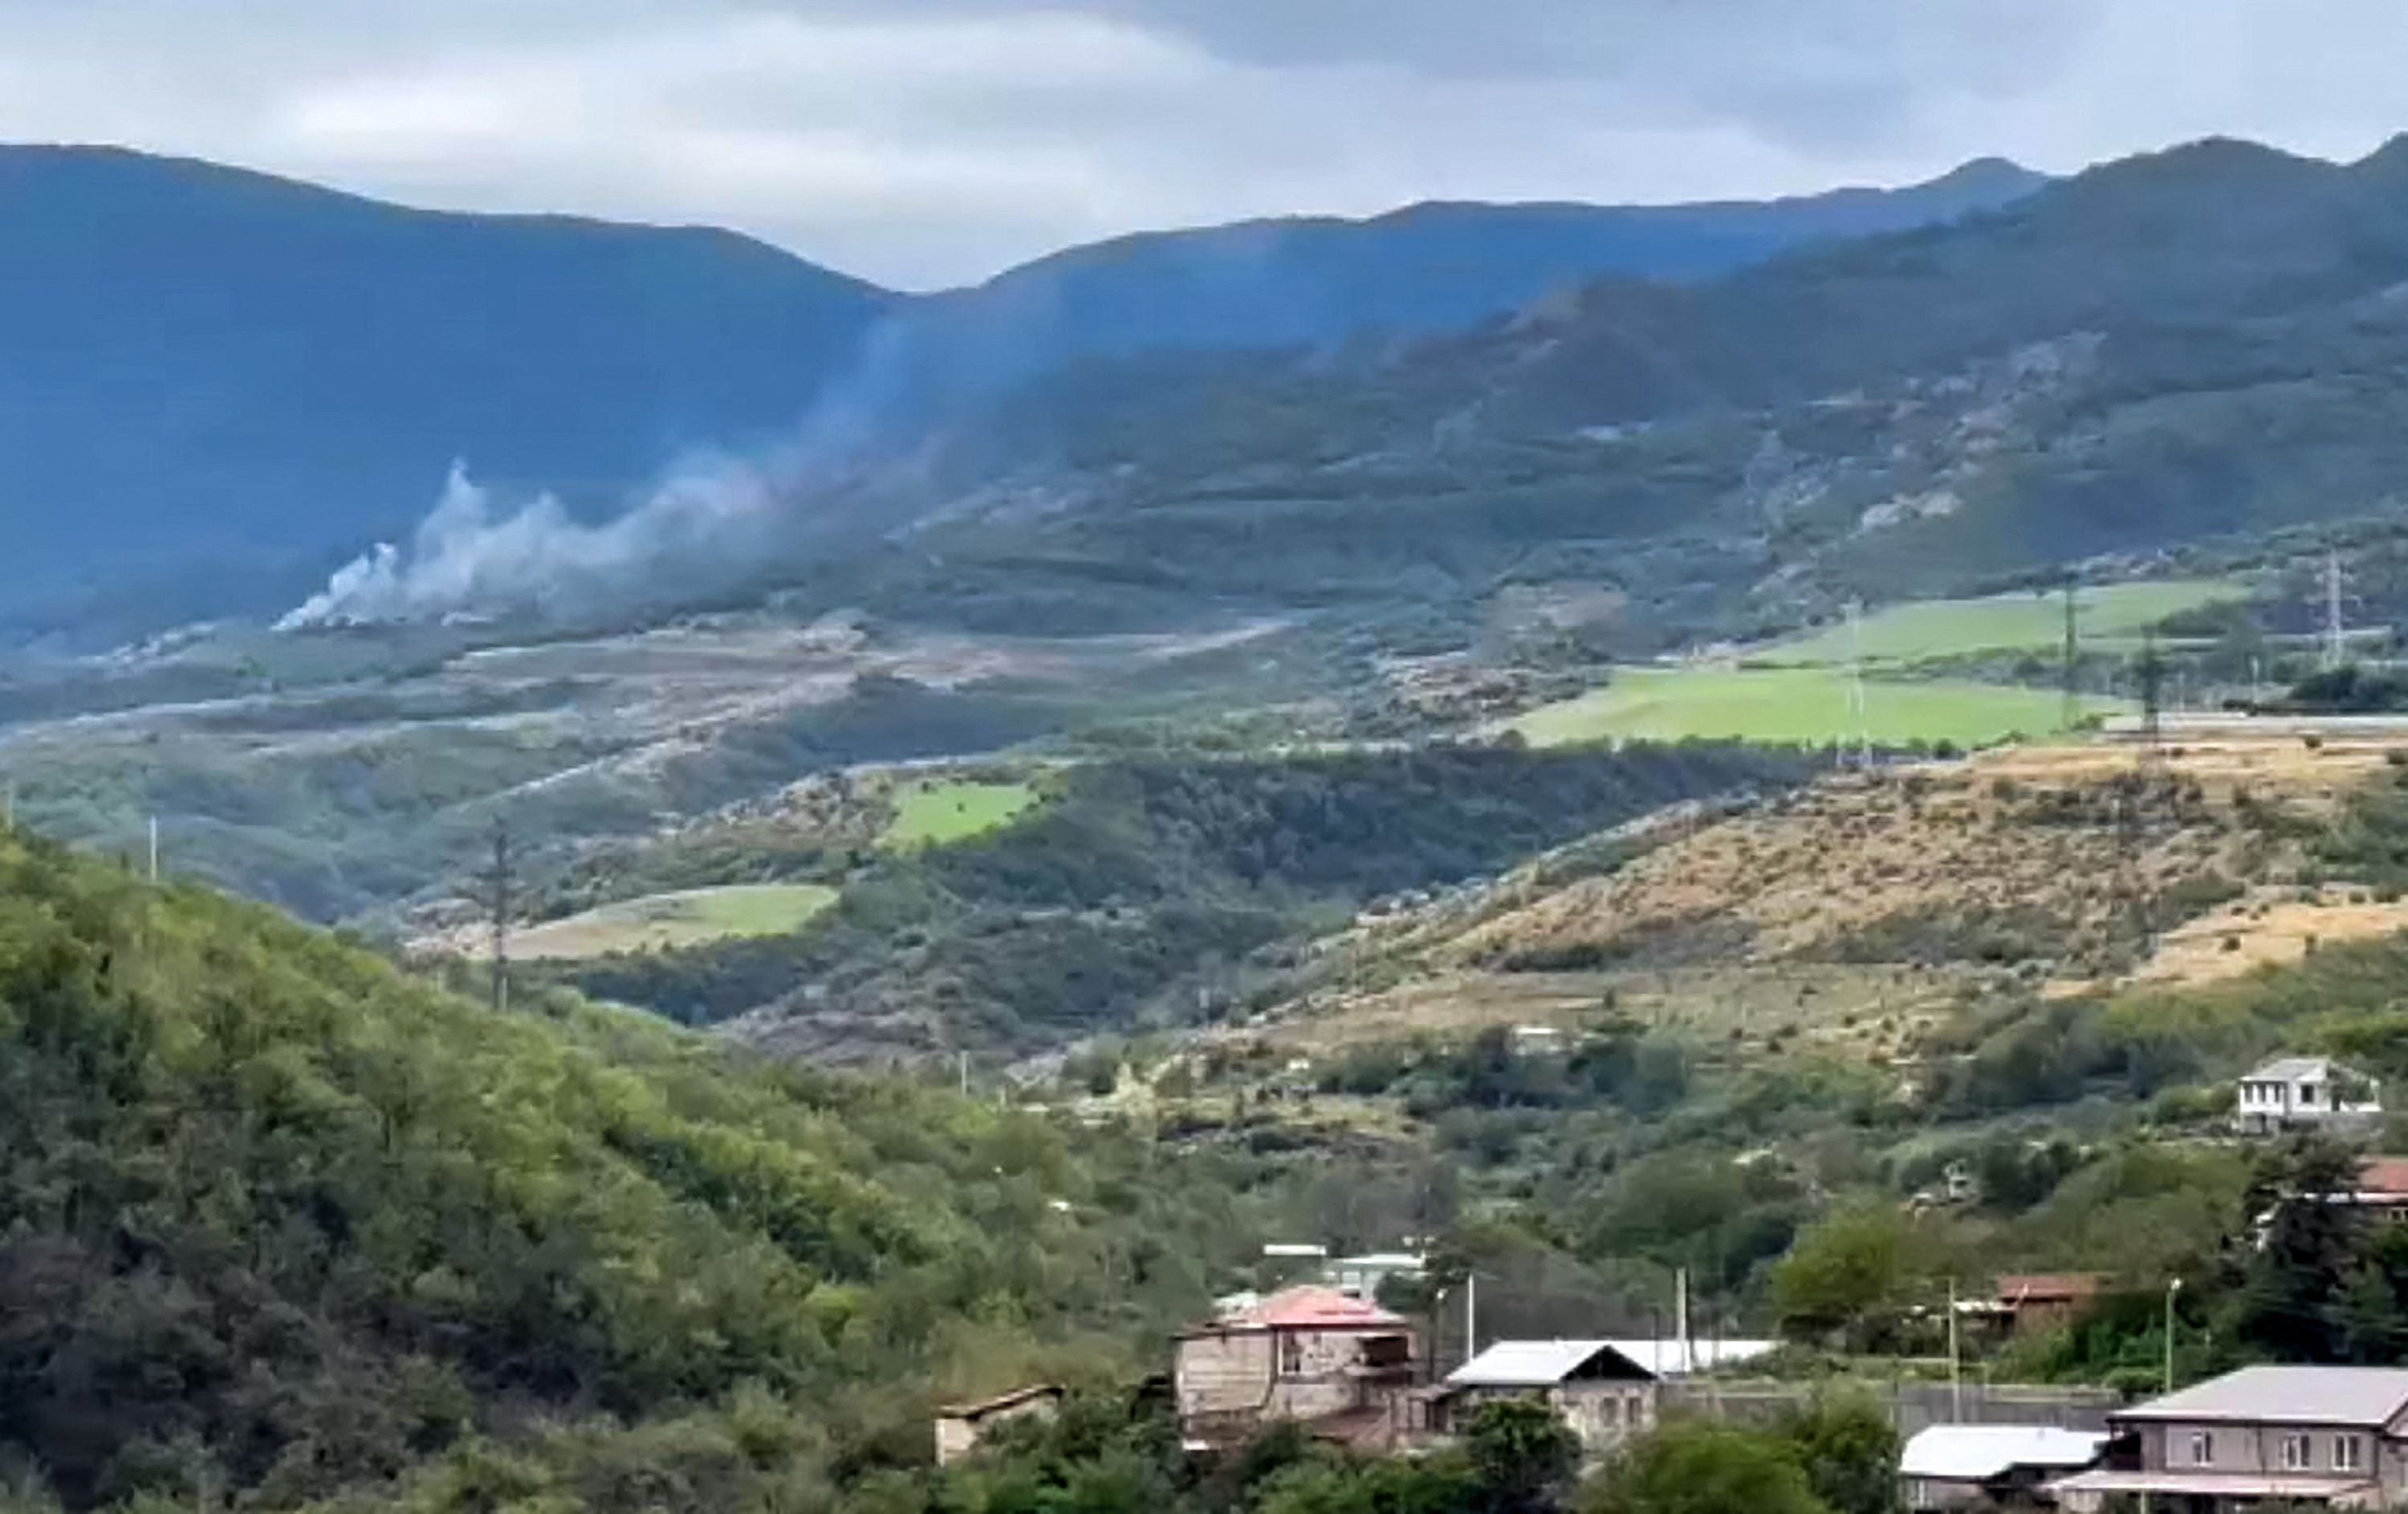 Smoke from an explosion on a hilltop outside Stepanakert, Nagorno-Karabakh